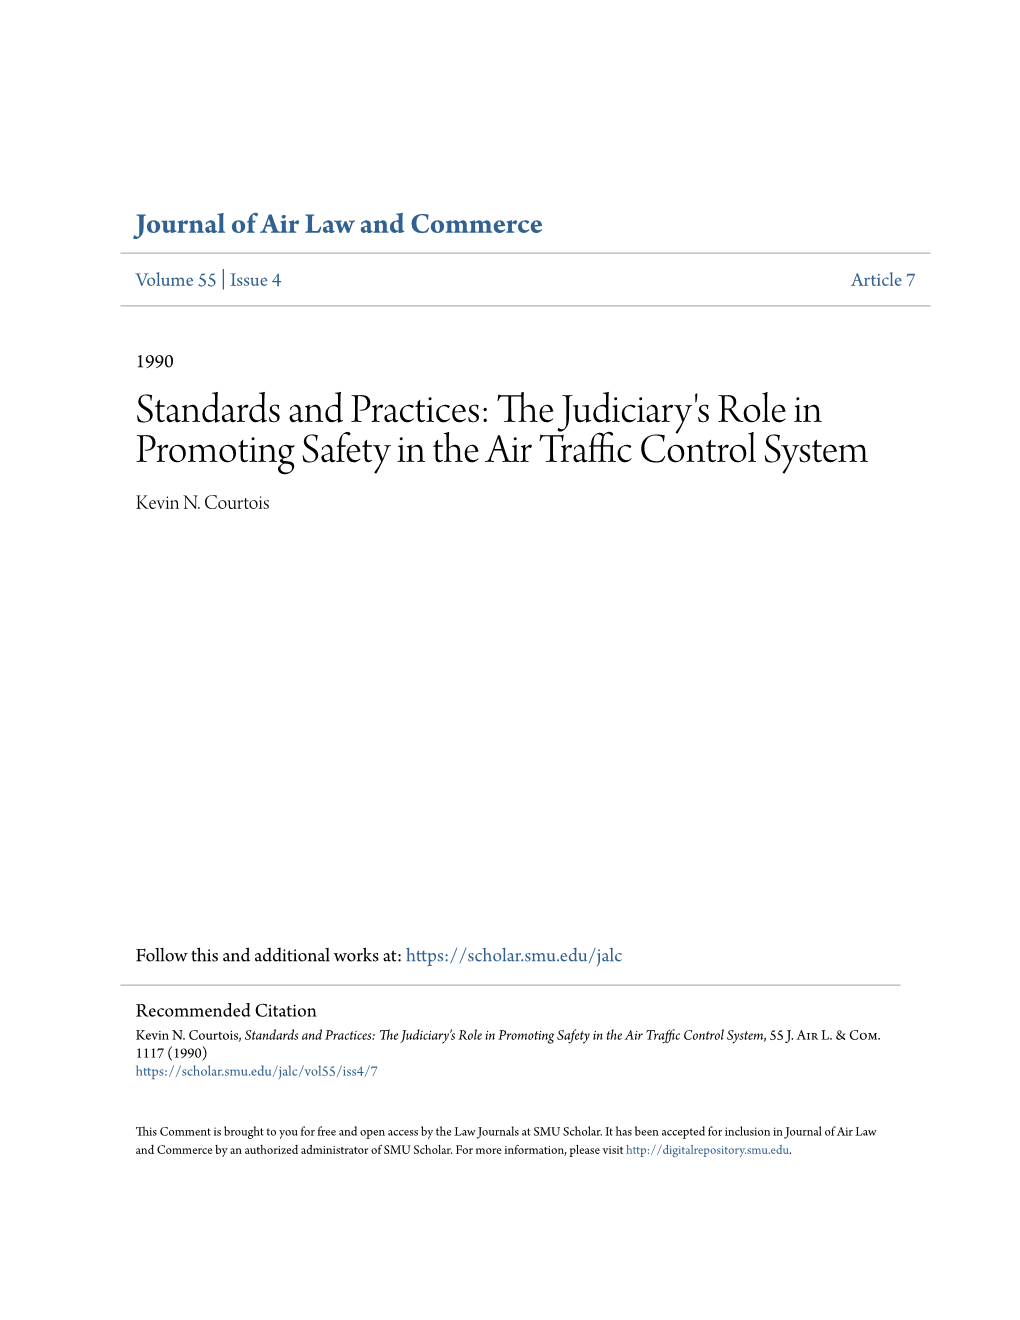 The Judiciary's Role in Promoting Safety in the Air Traffic Nco Trol System, 55 J